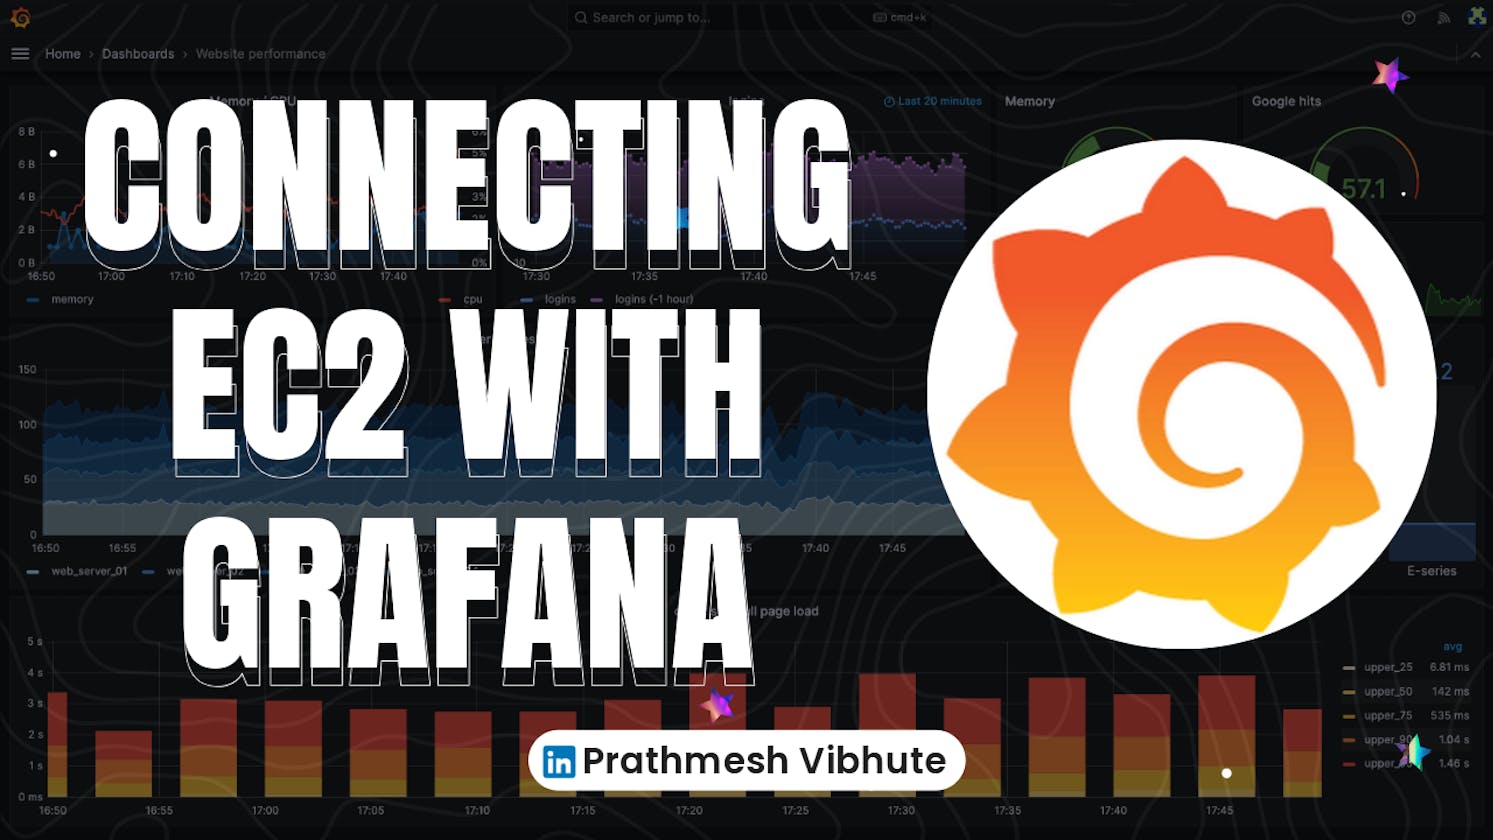 Day 74 : Connecting EC2 with Grafana .